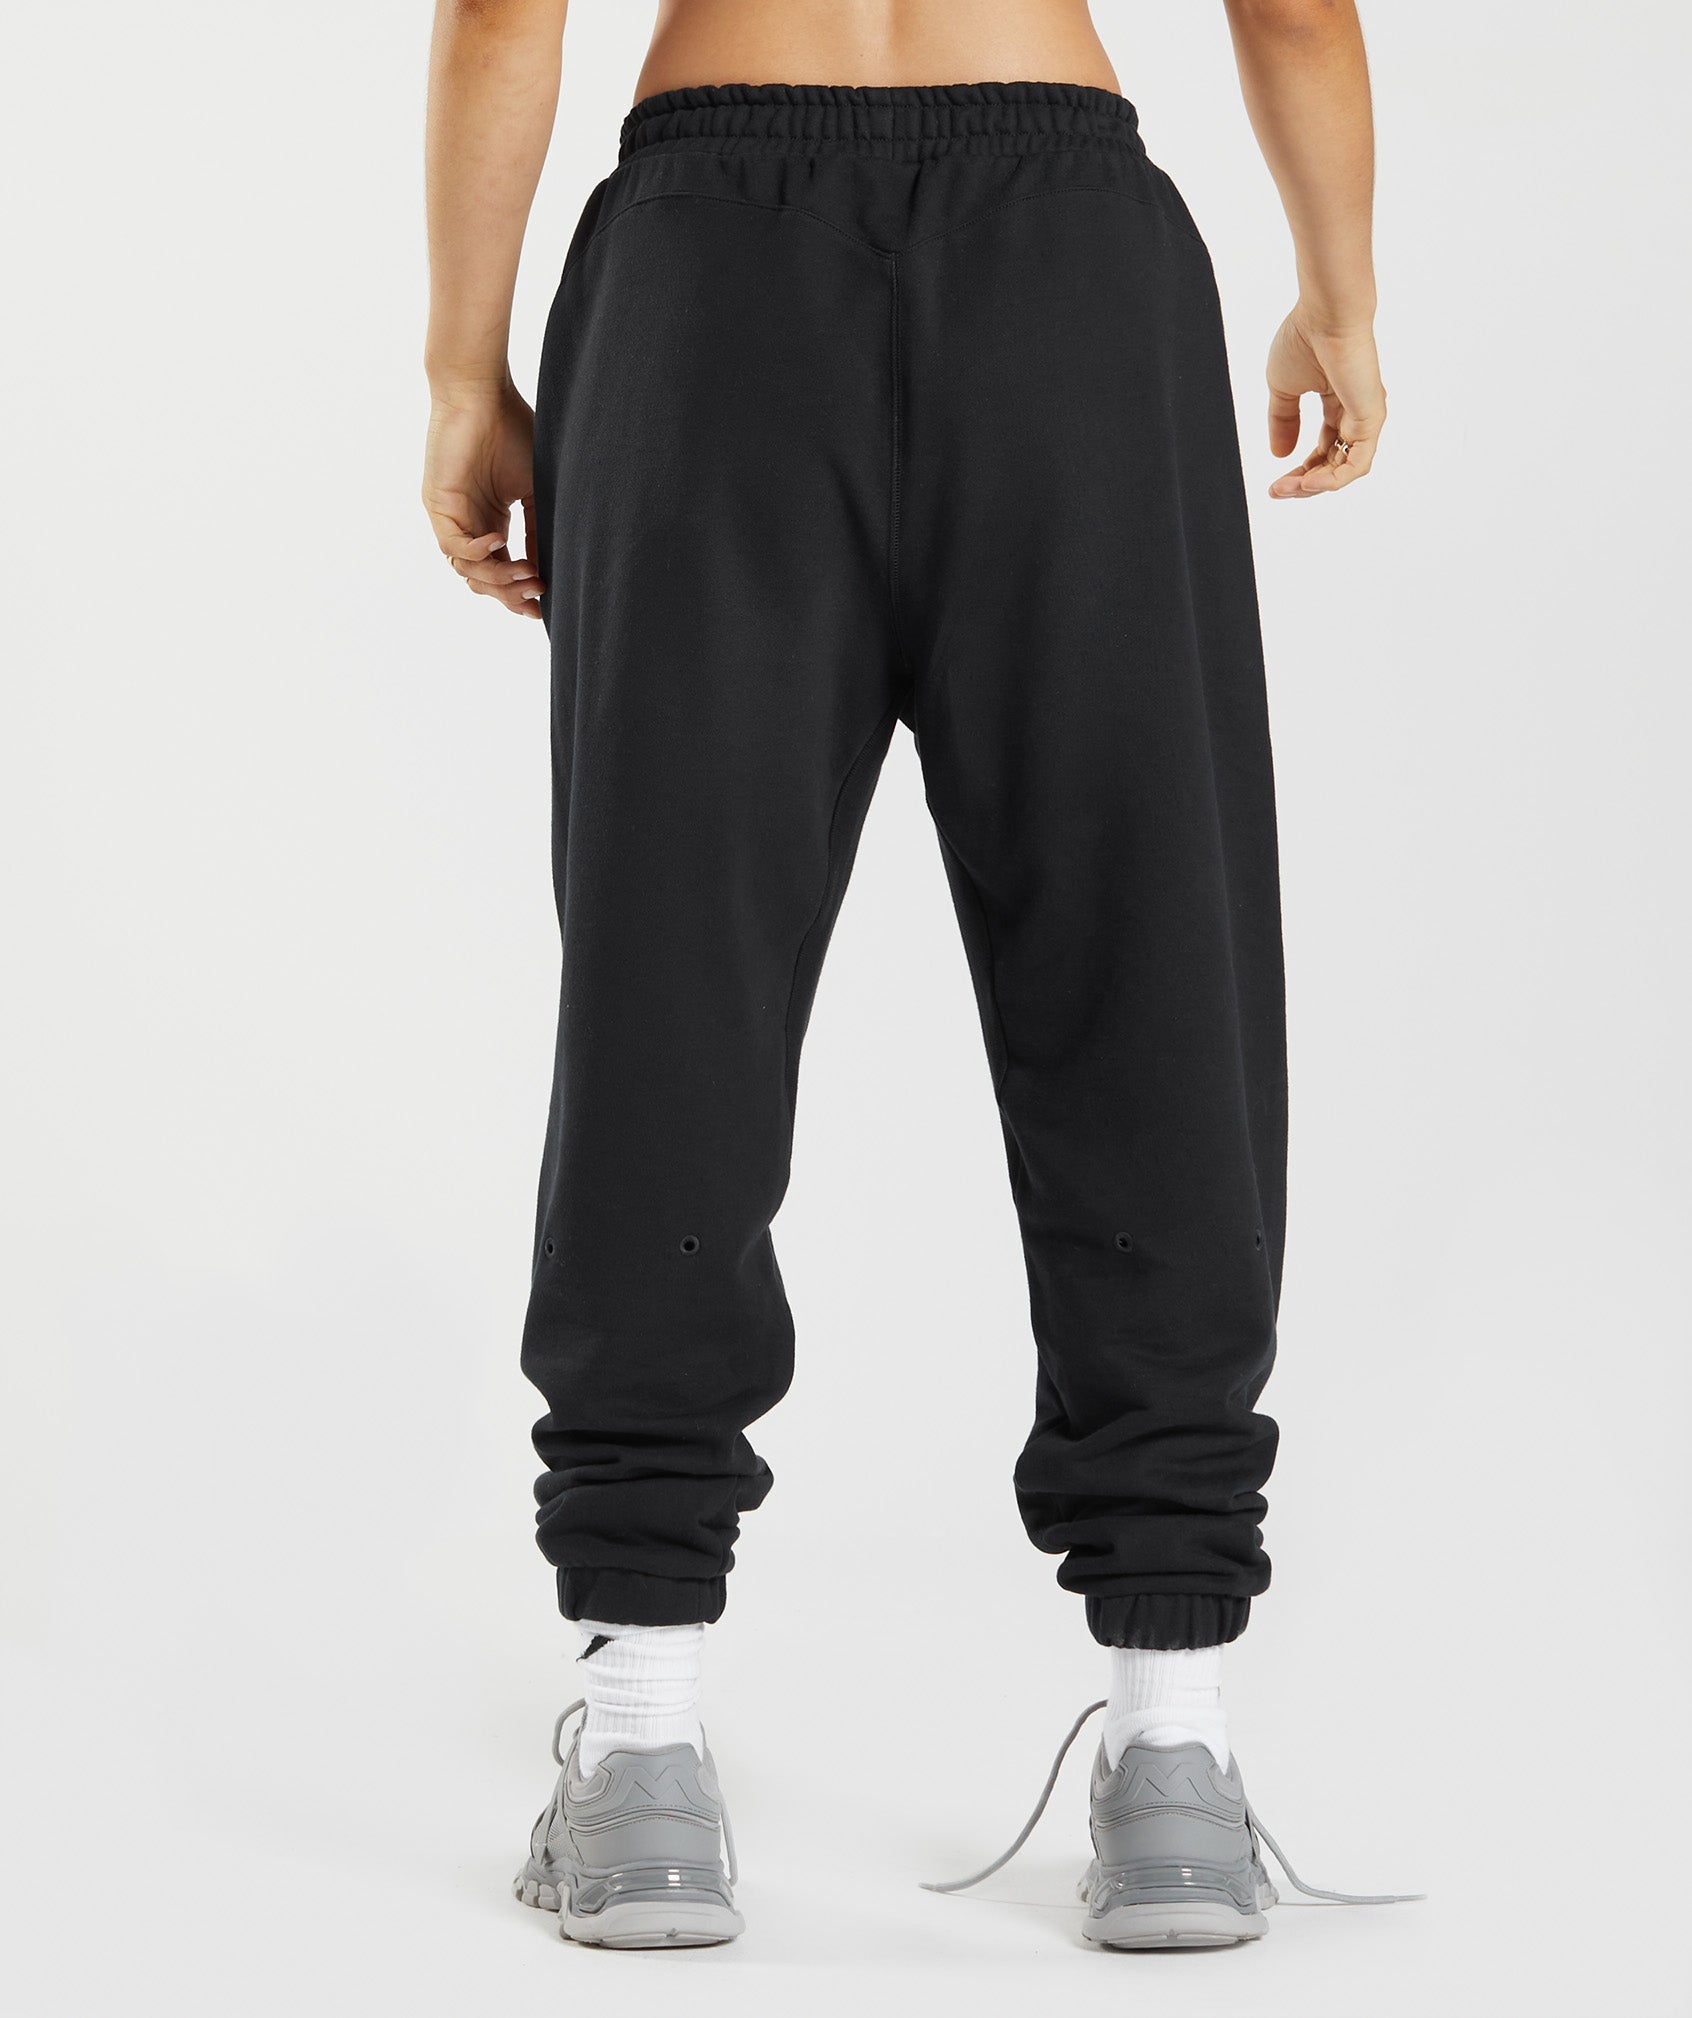 GS10 Year Joggers in Black - view 2